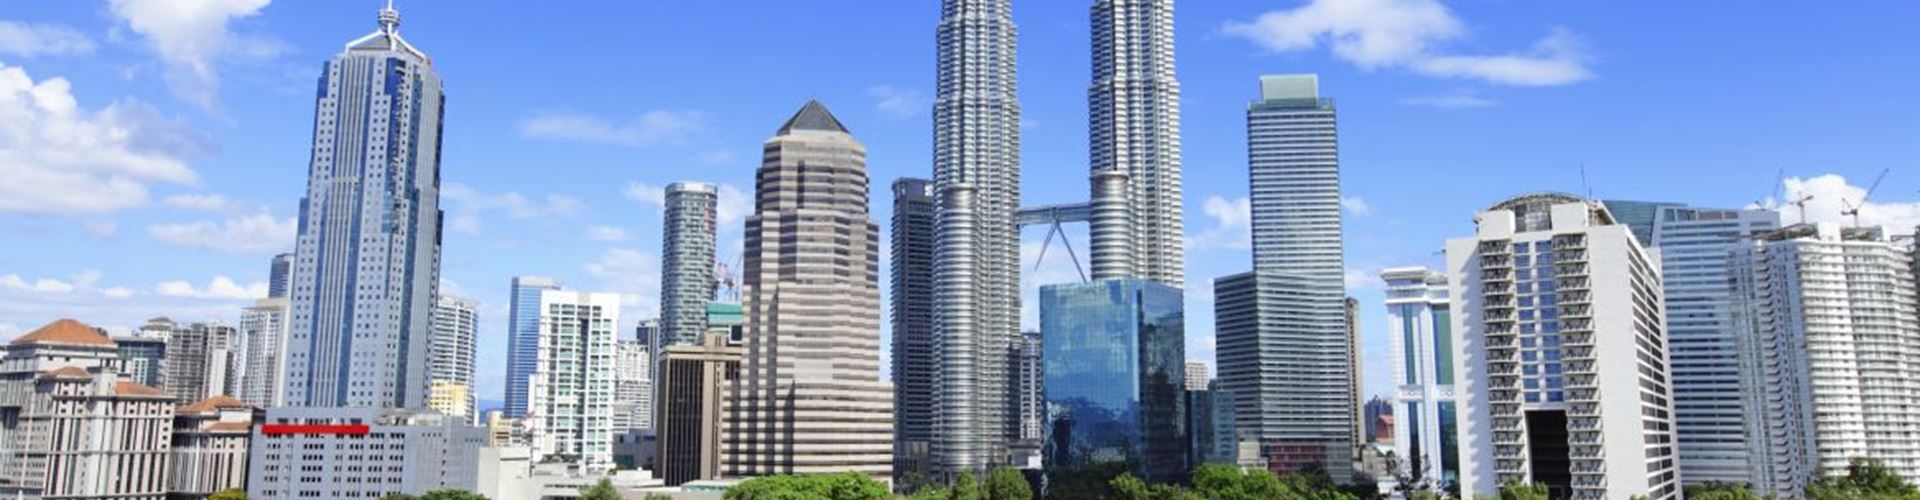 Malaysia growth fastest in Asia-Pacific after China